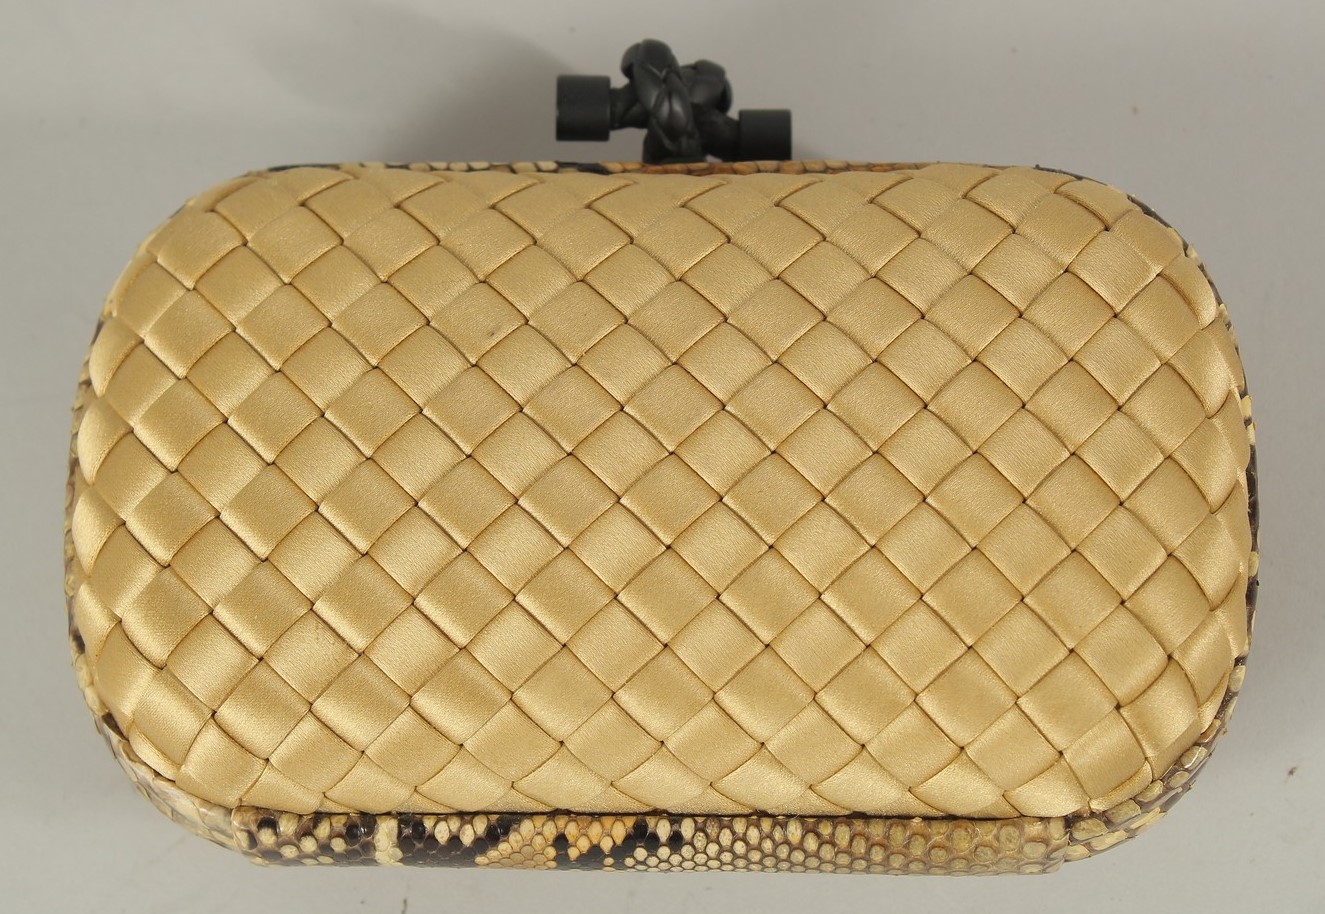 A BOTTEGA VENETA, ITALY, CLUTCH BAG with snakeskin banding. 17cms long, with a dust cover.